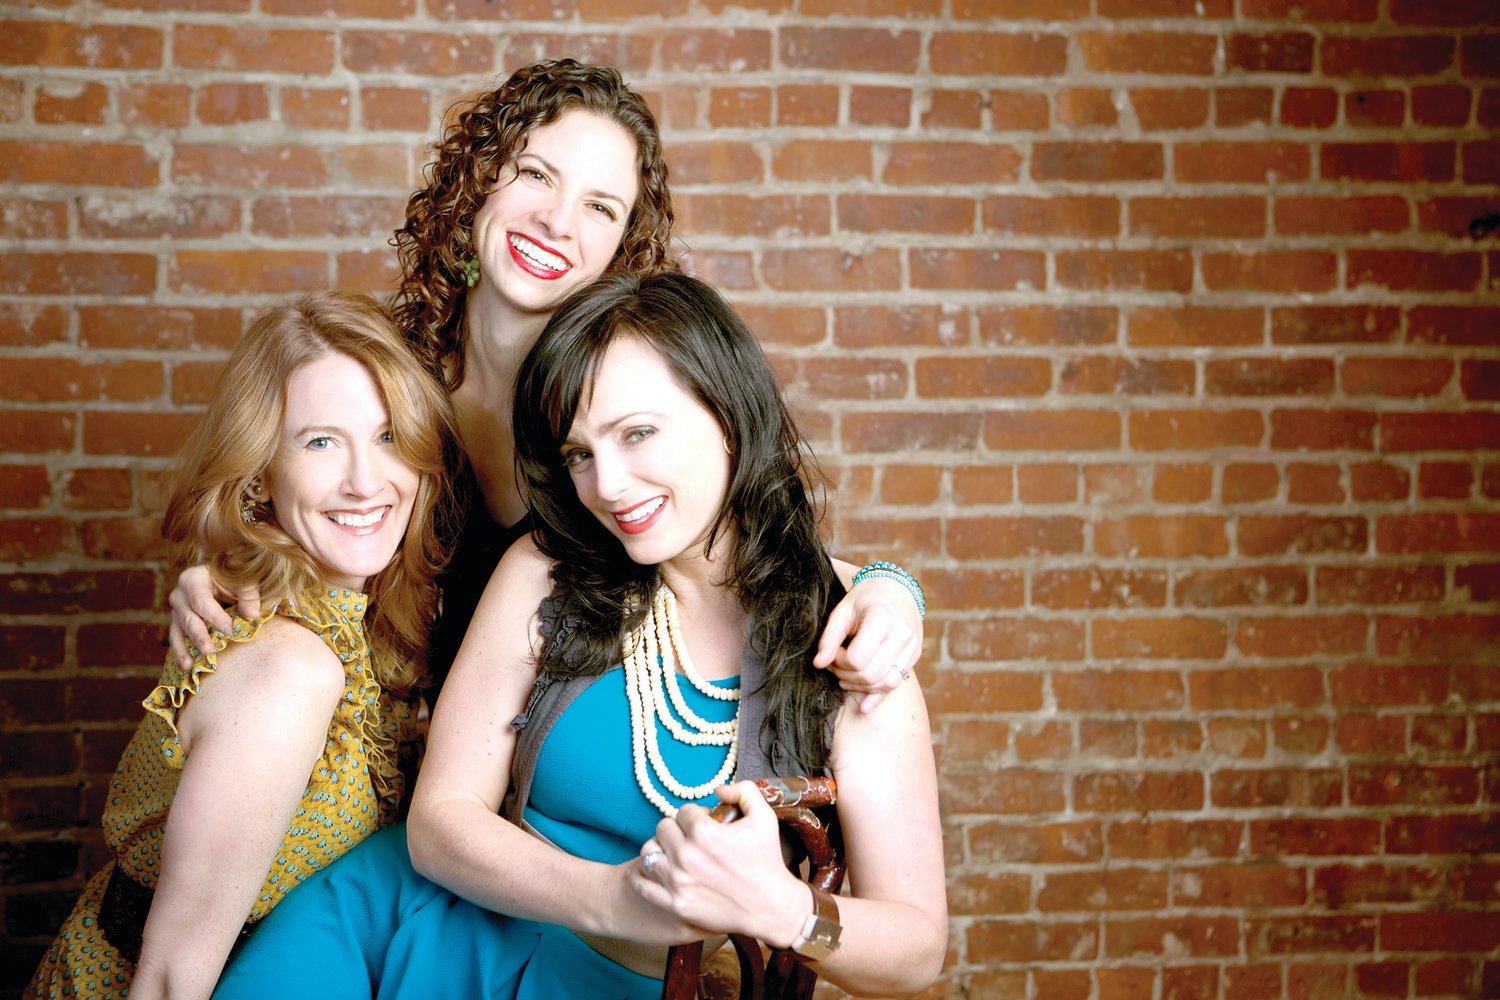 Americana trio Red Molly, from left, Laurie MacAllister, Abbie Gardner and Molly Venter play the Sellersville Theater May 18. Photograph by Whitney Kidder.